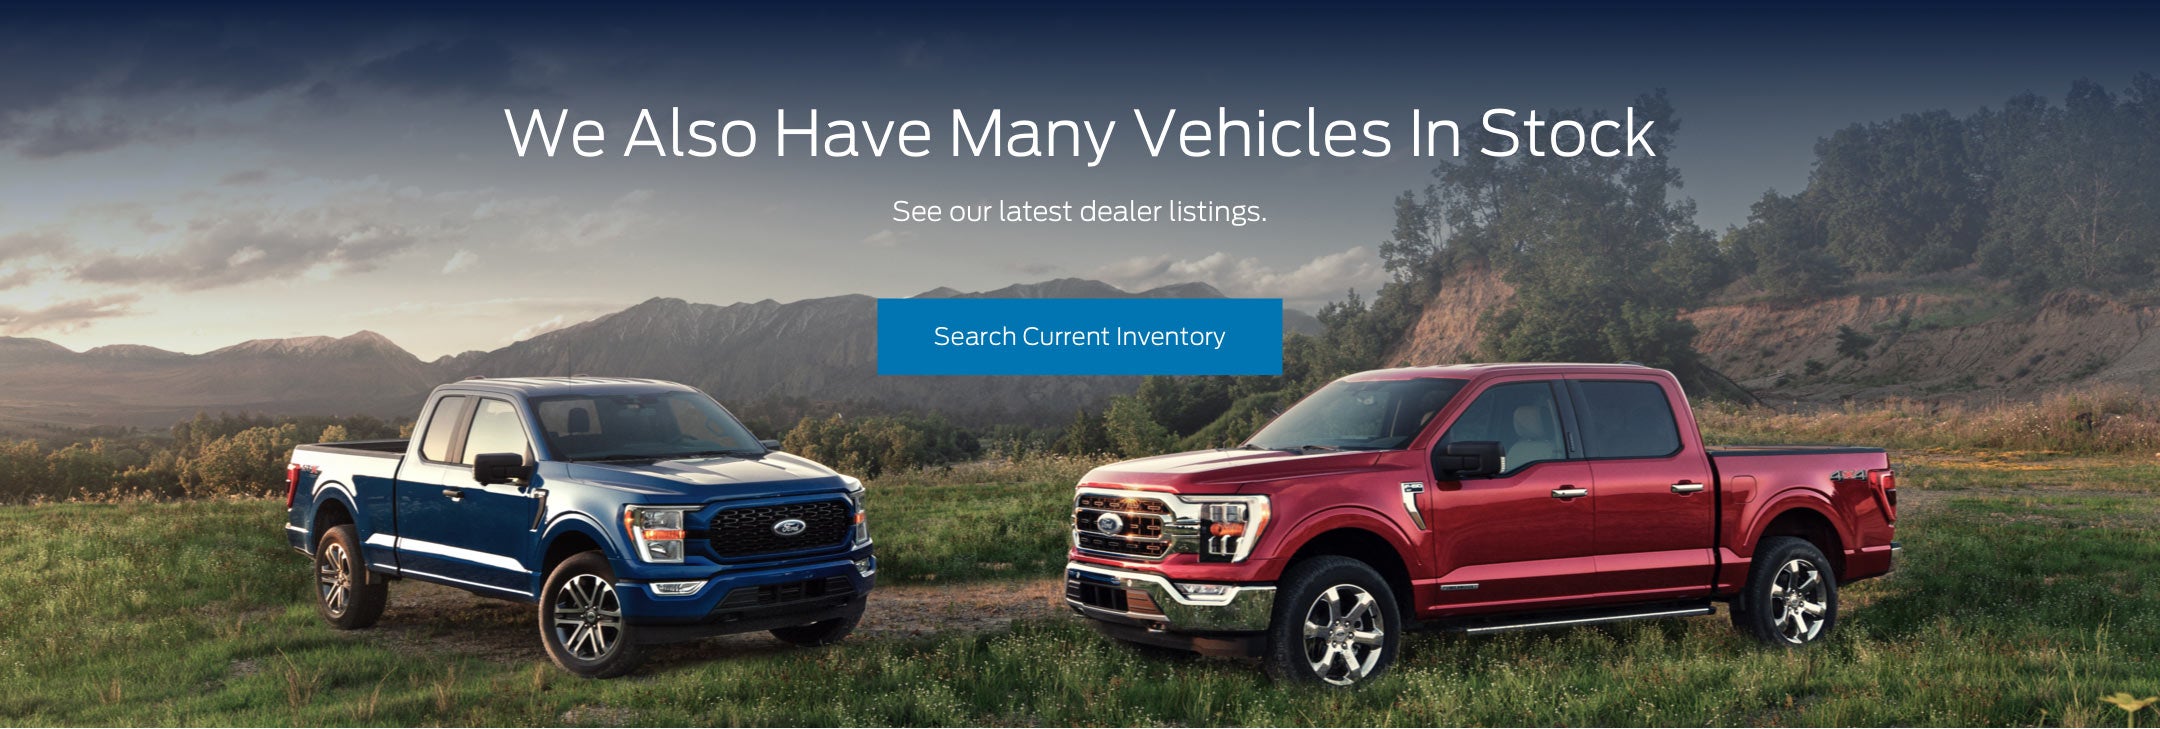 Ford vehicles in stock | Ted Britt Ford of Fairfax in Fairfax VA